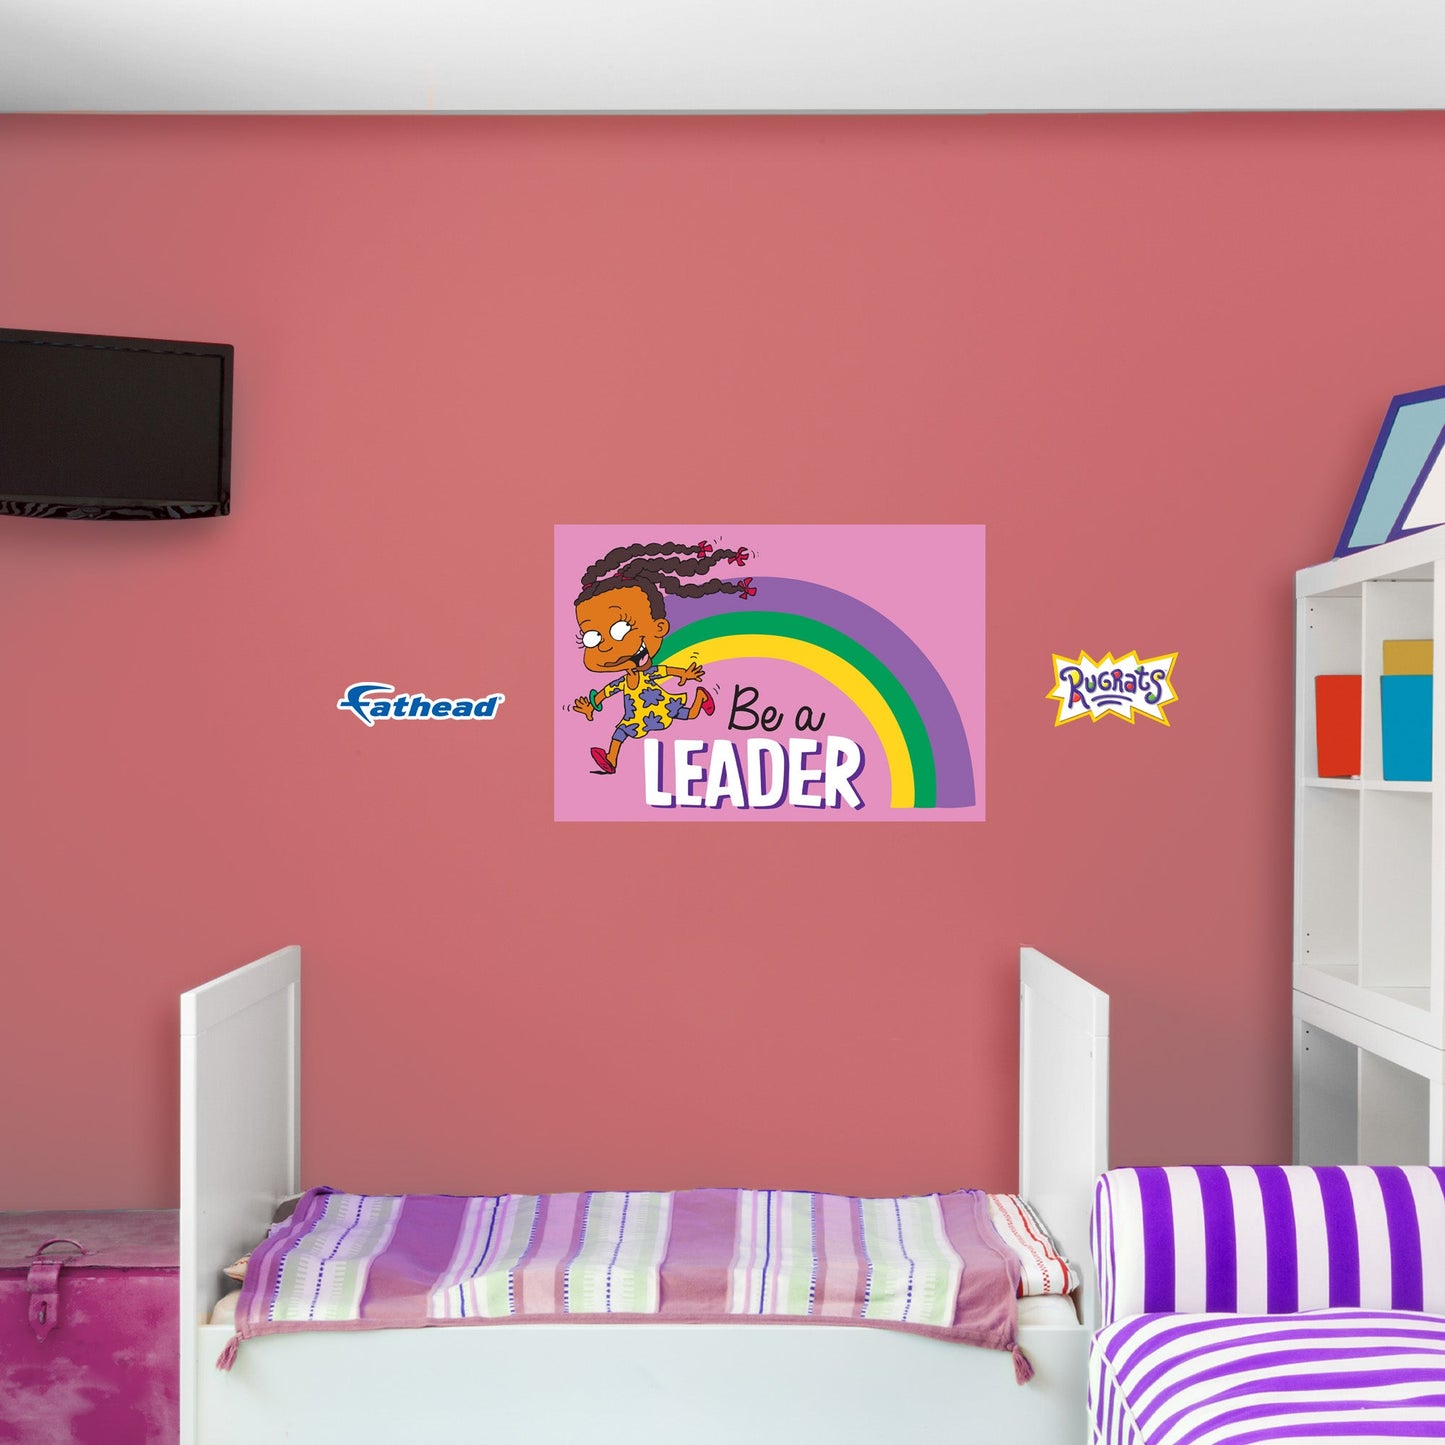 Rugrats: Be A Leader Poster - Officially Licensed Nickelodeon Removable Adhesive Decal